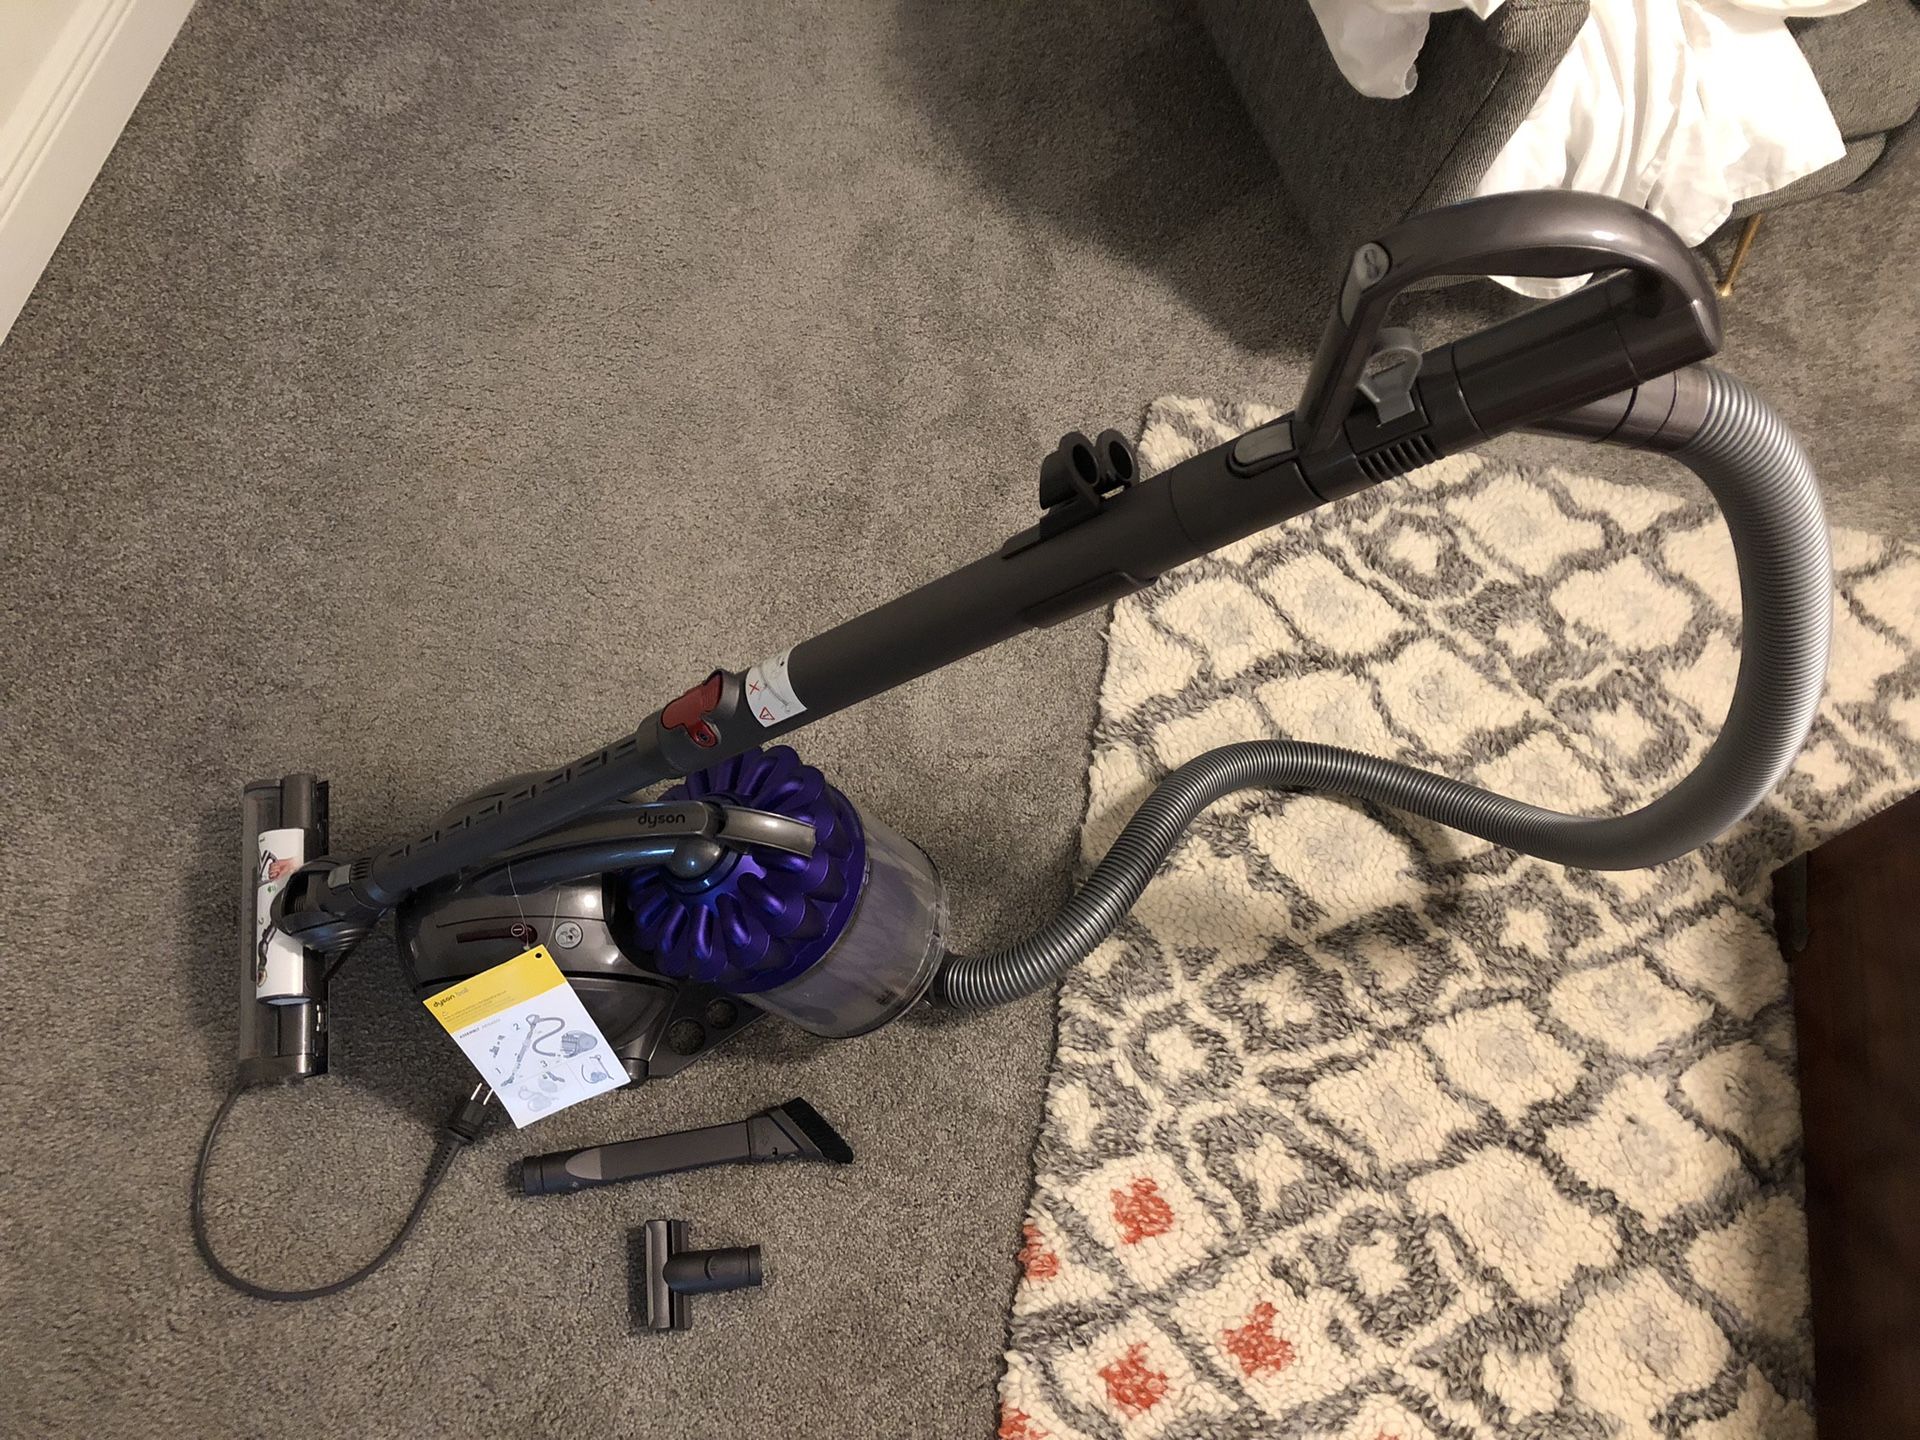 Dyson Dc39 Canister Vacuum. Lightly used with tools and new filter. Clean.